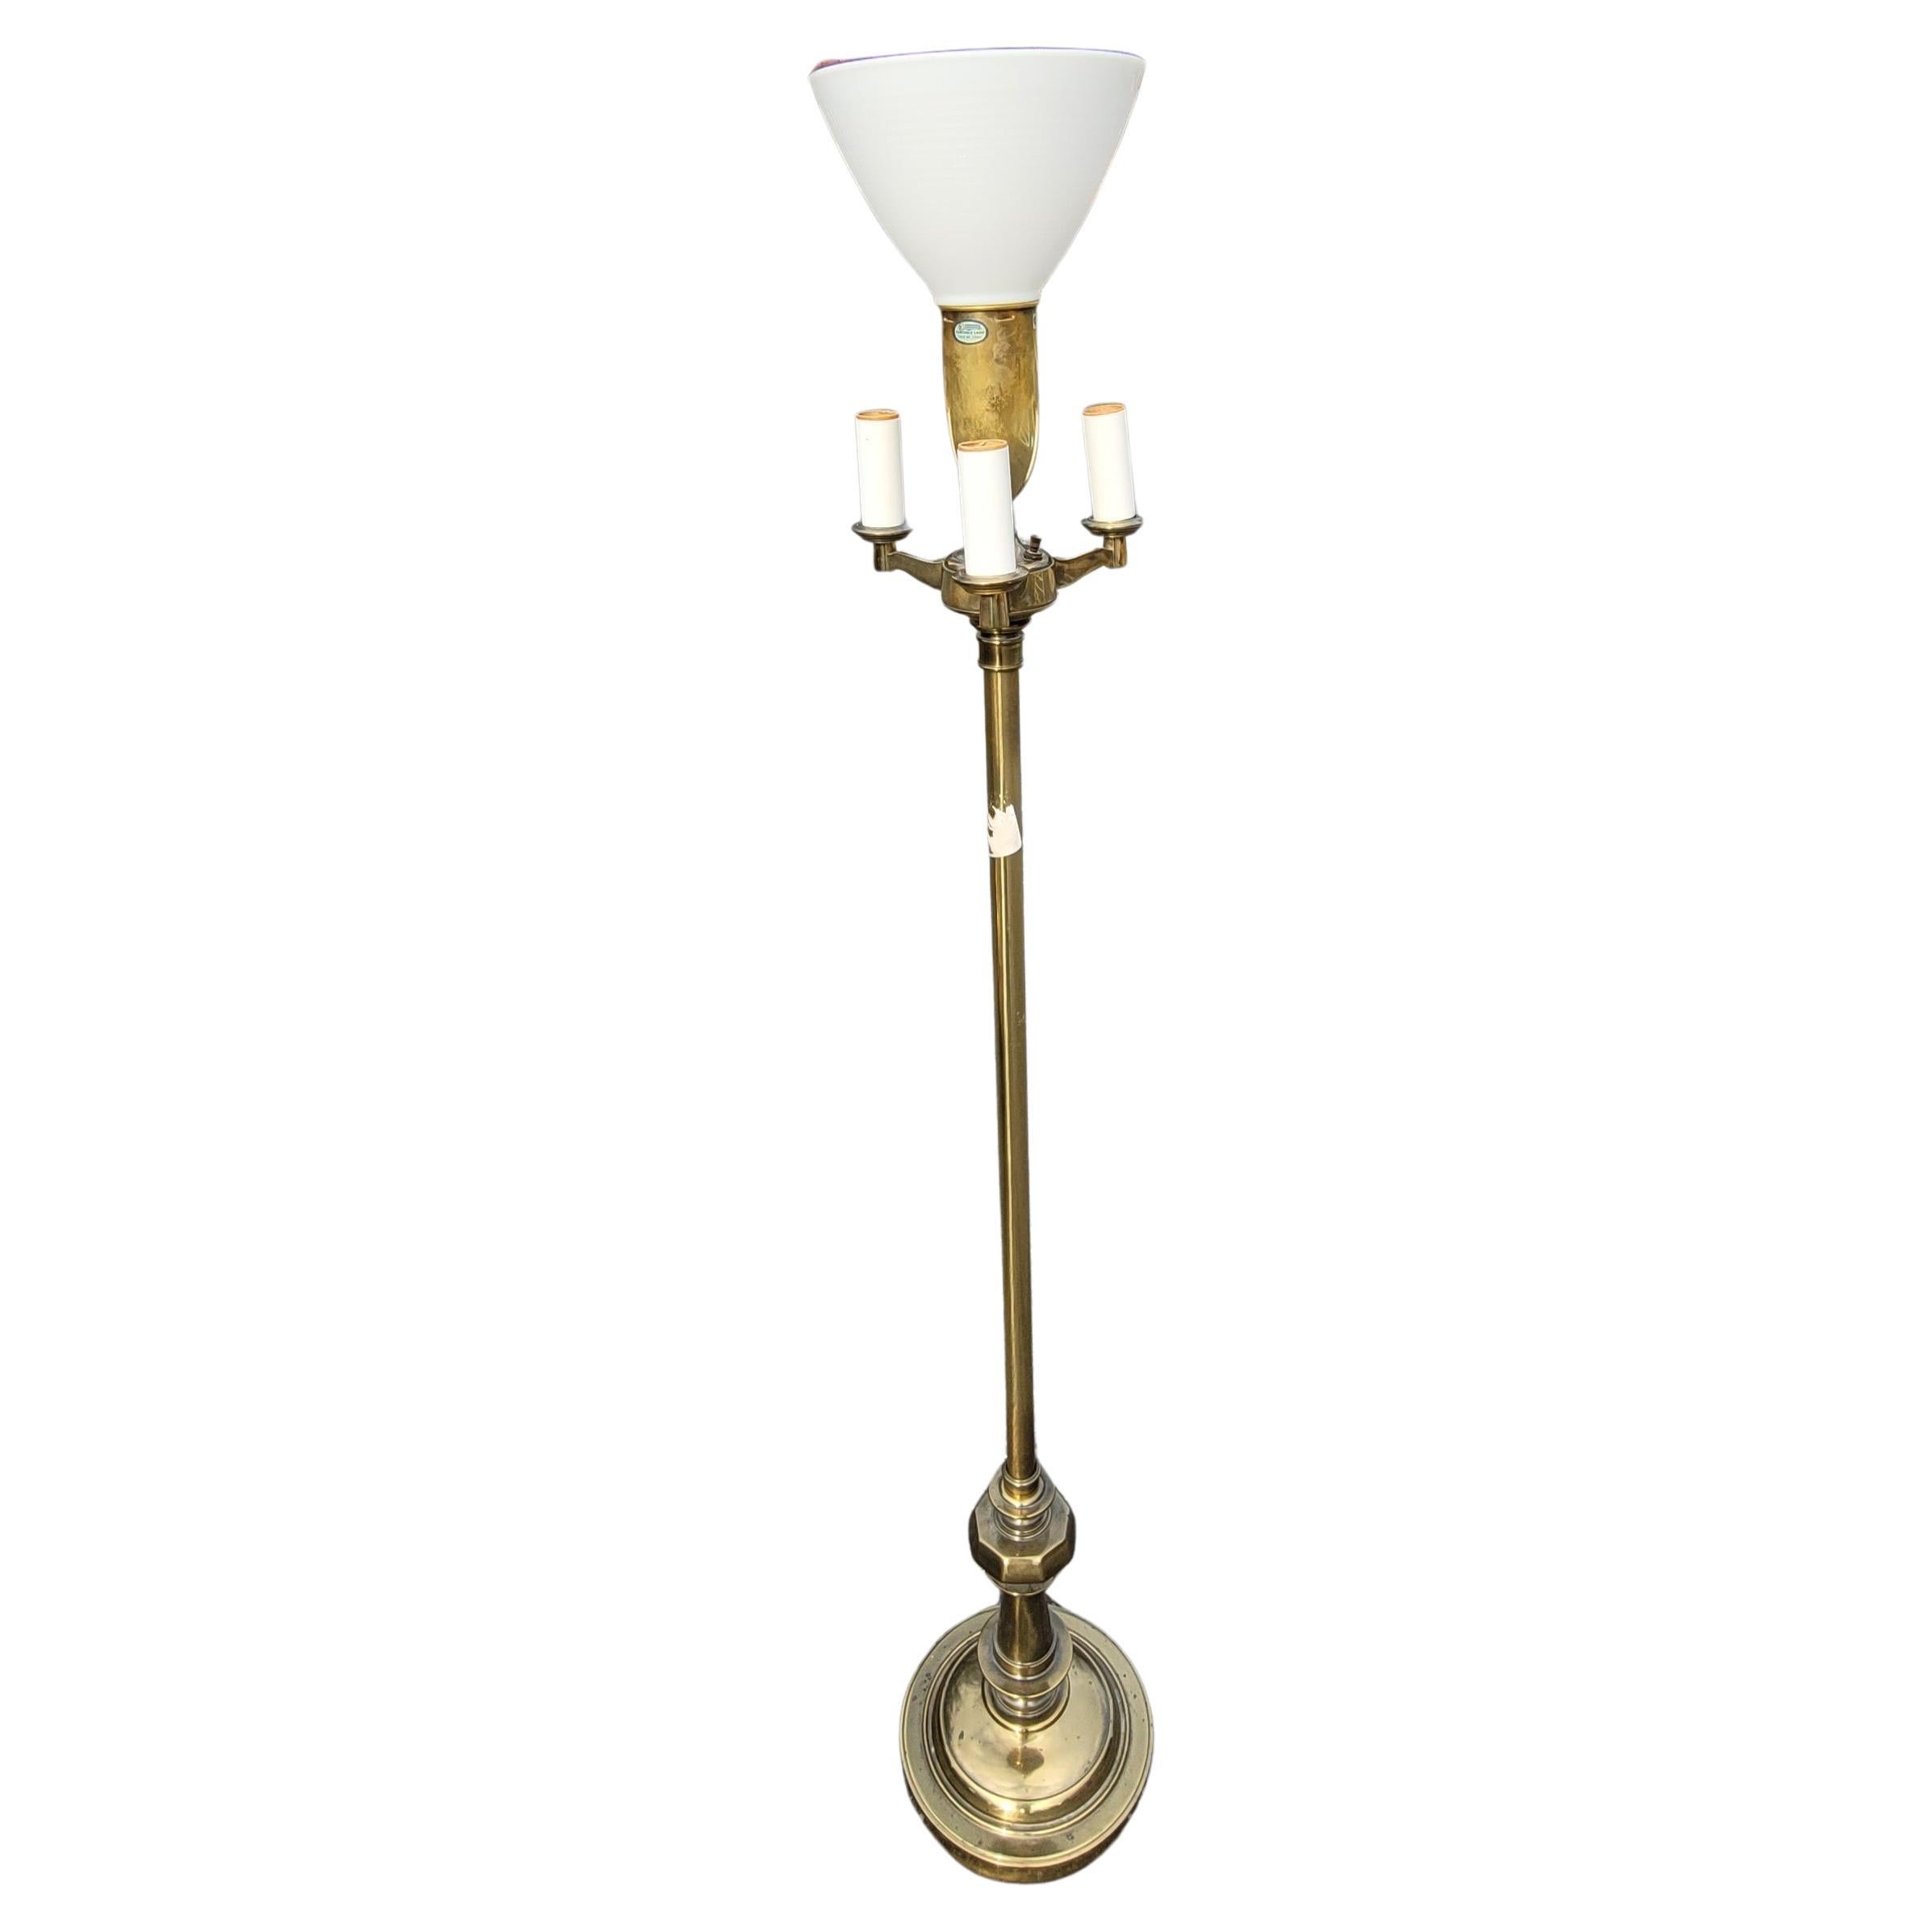 1970s Stiffel 4-Light Torchiere Brass Floor Lamp with Milk Glass Shade For Sale